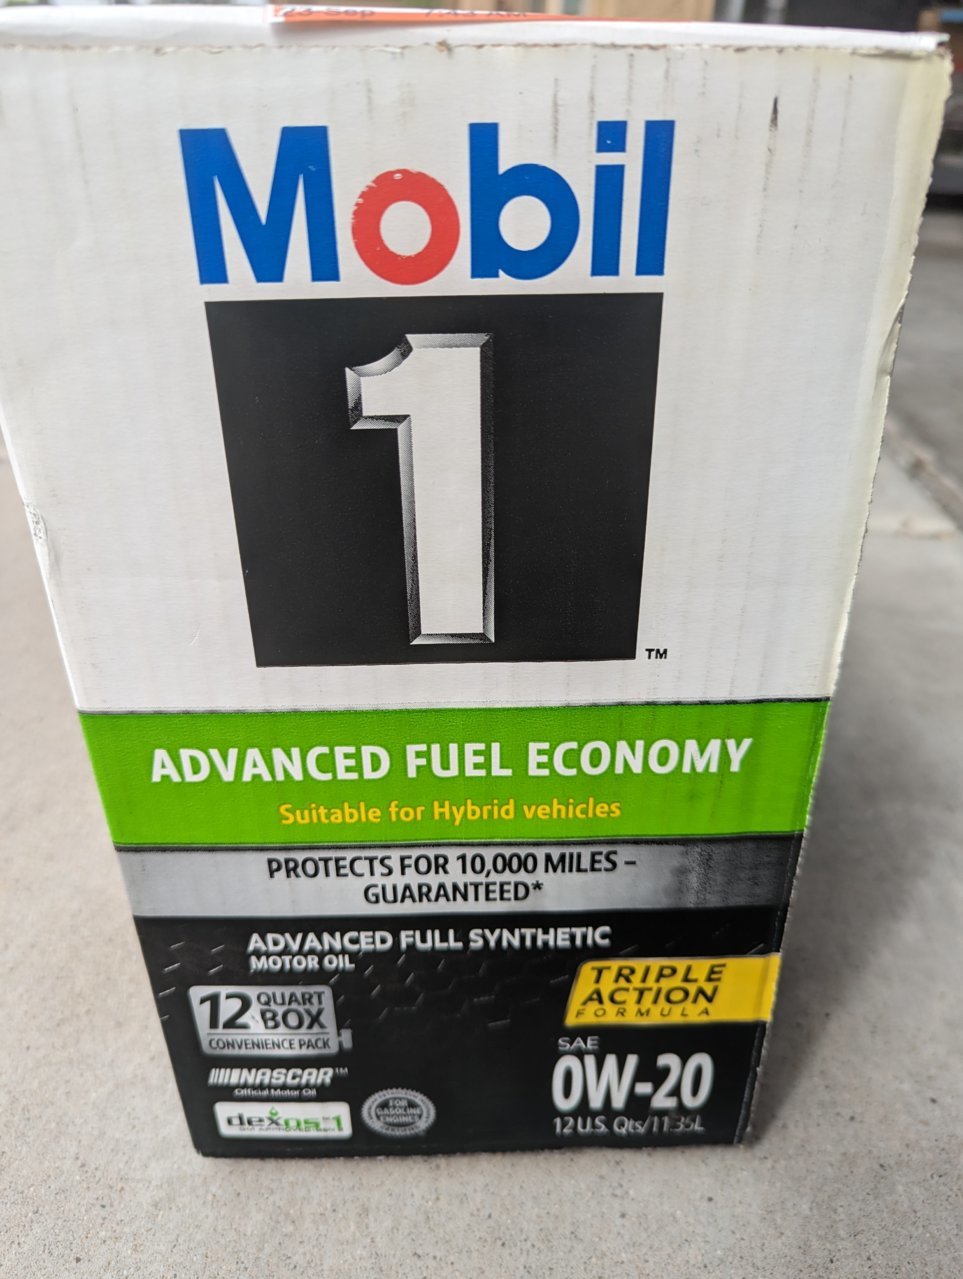 Mobil 1 Advanced Fuel Economy 0W-20 for GM, Honda, Nissan and